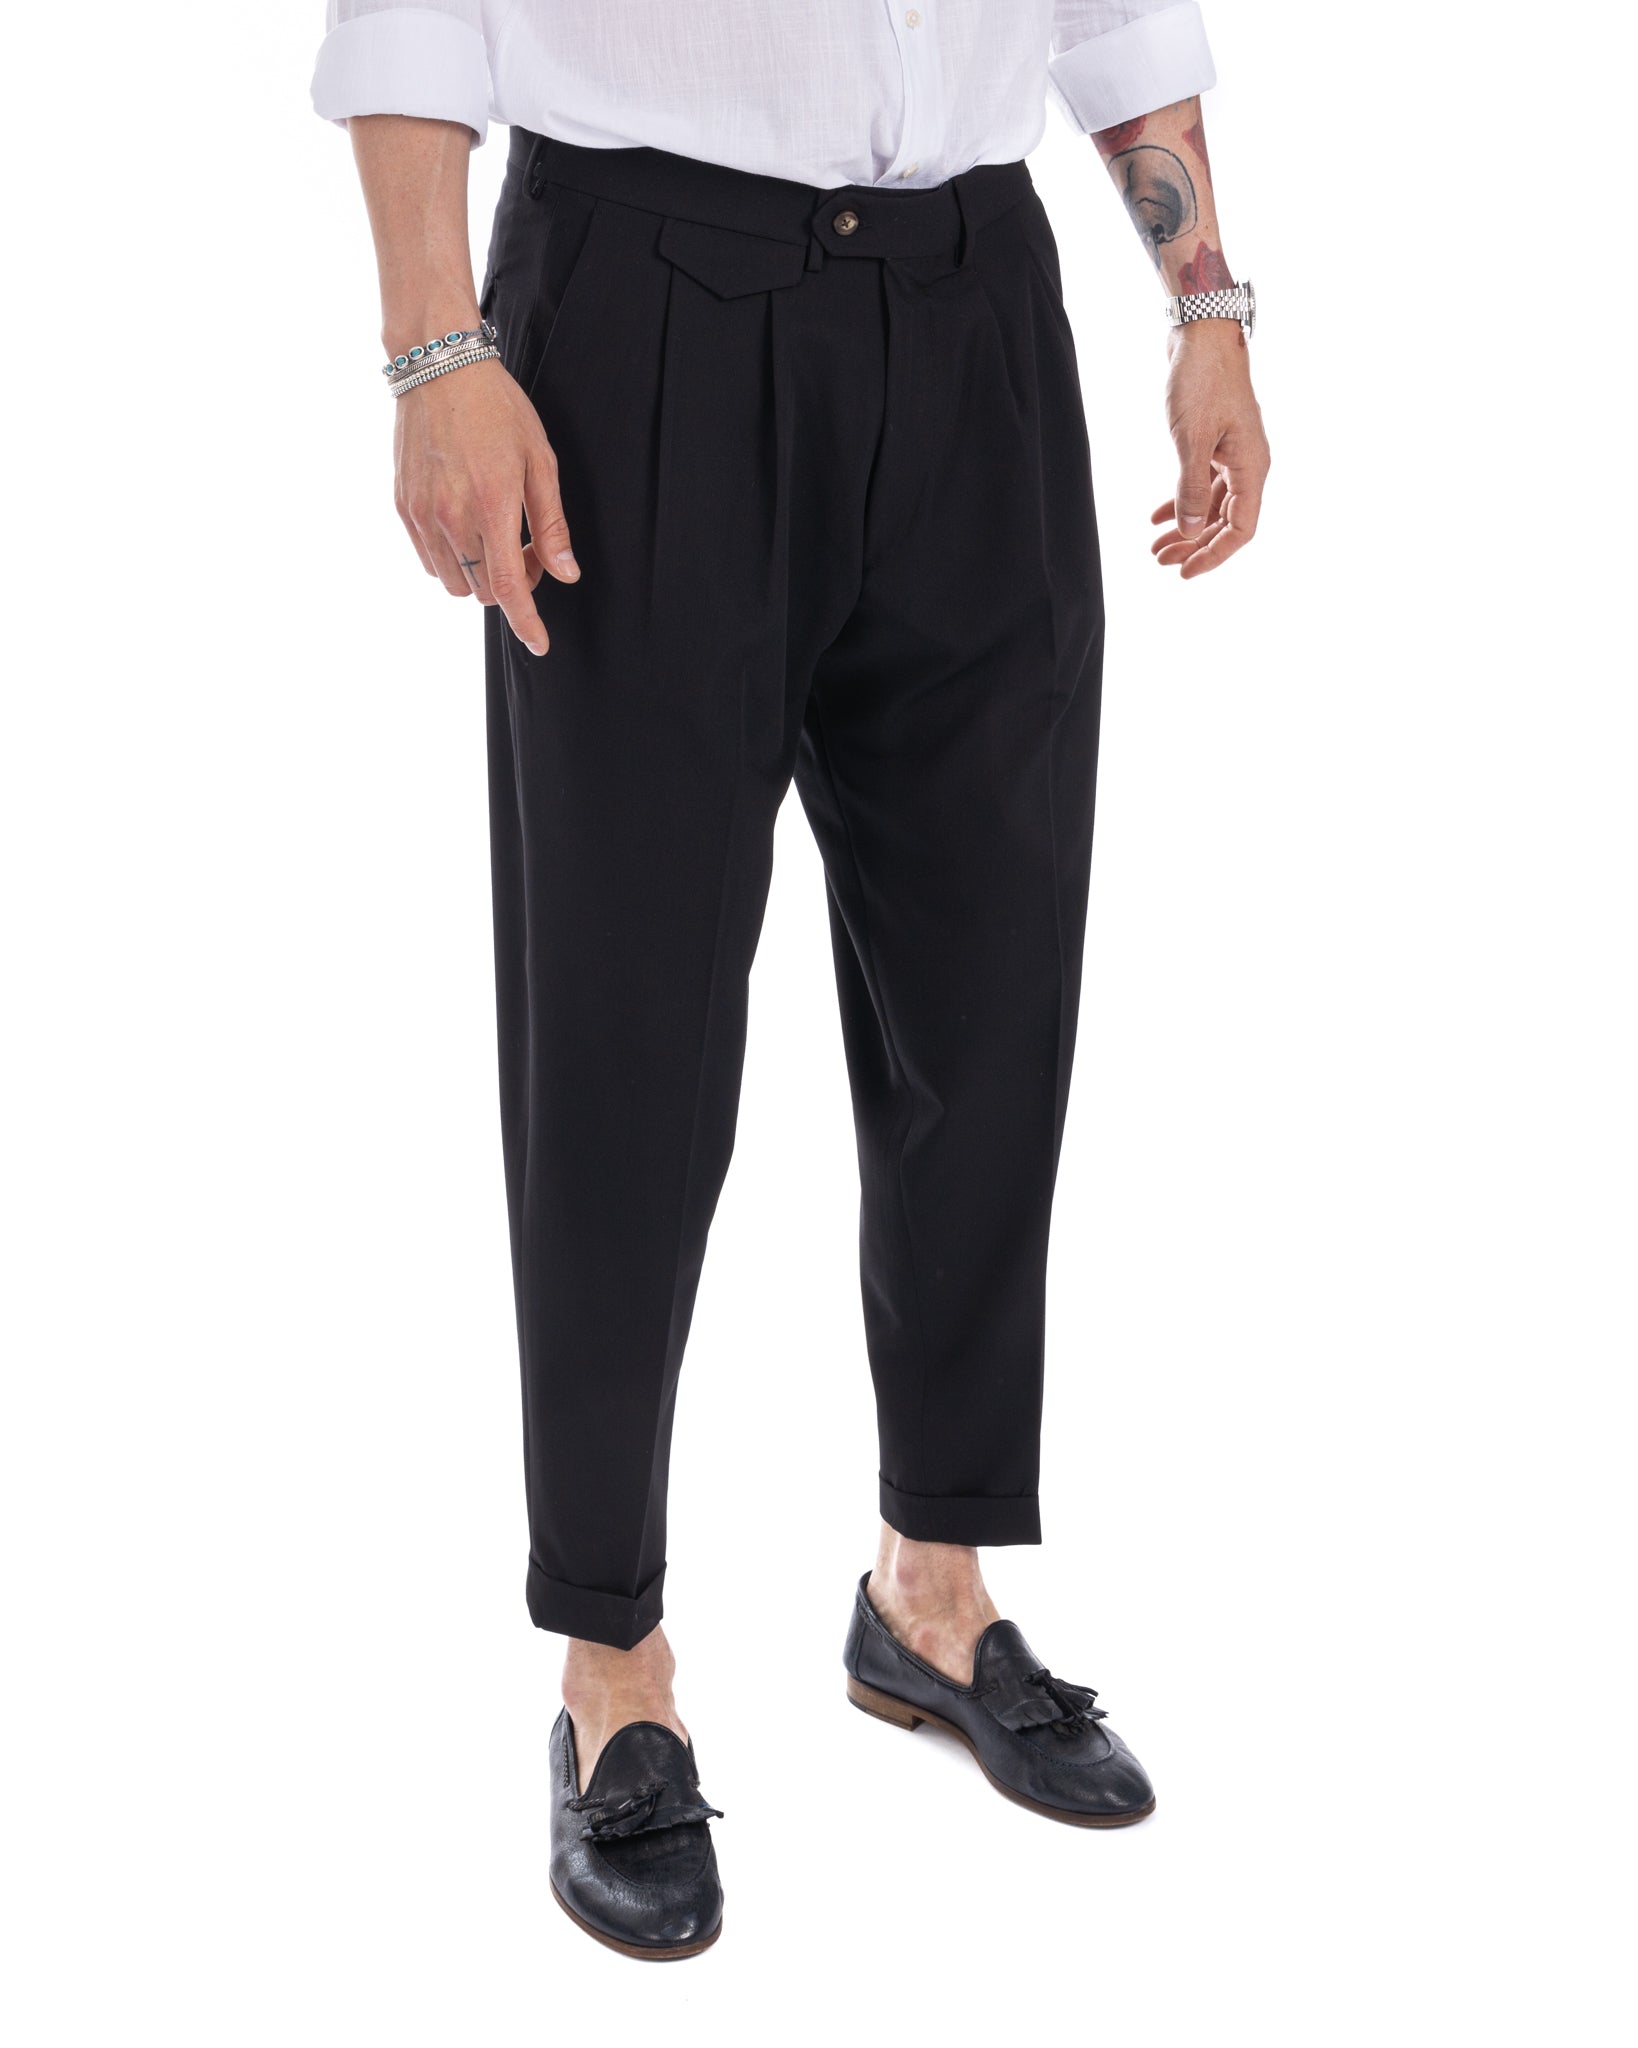 Taylor - black high waisted trousers